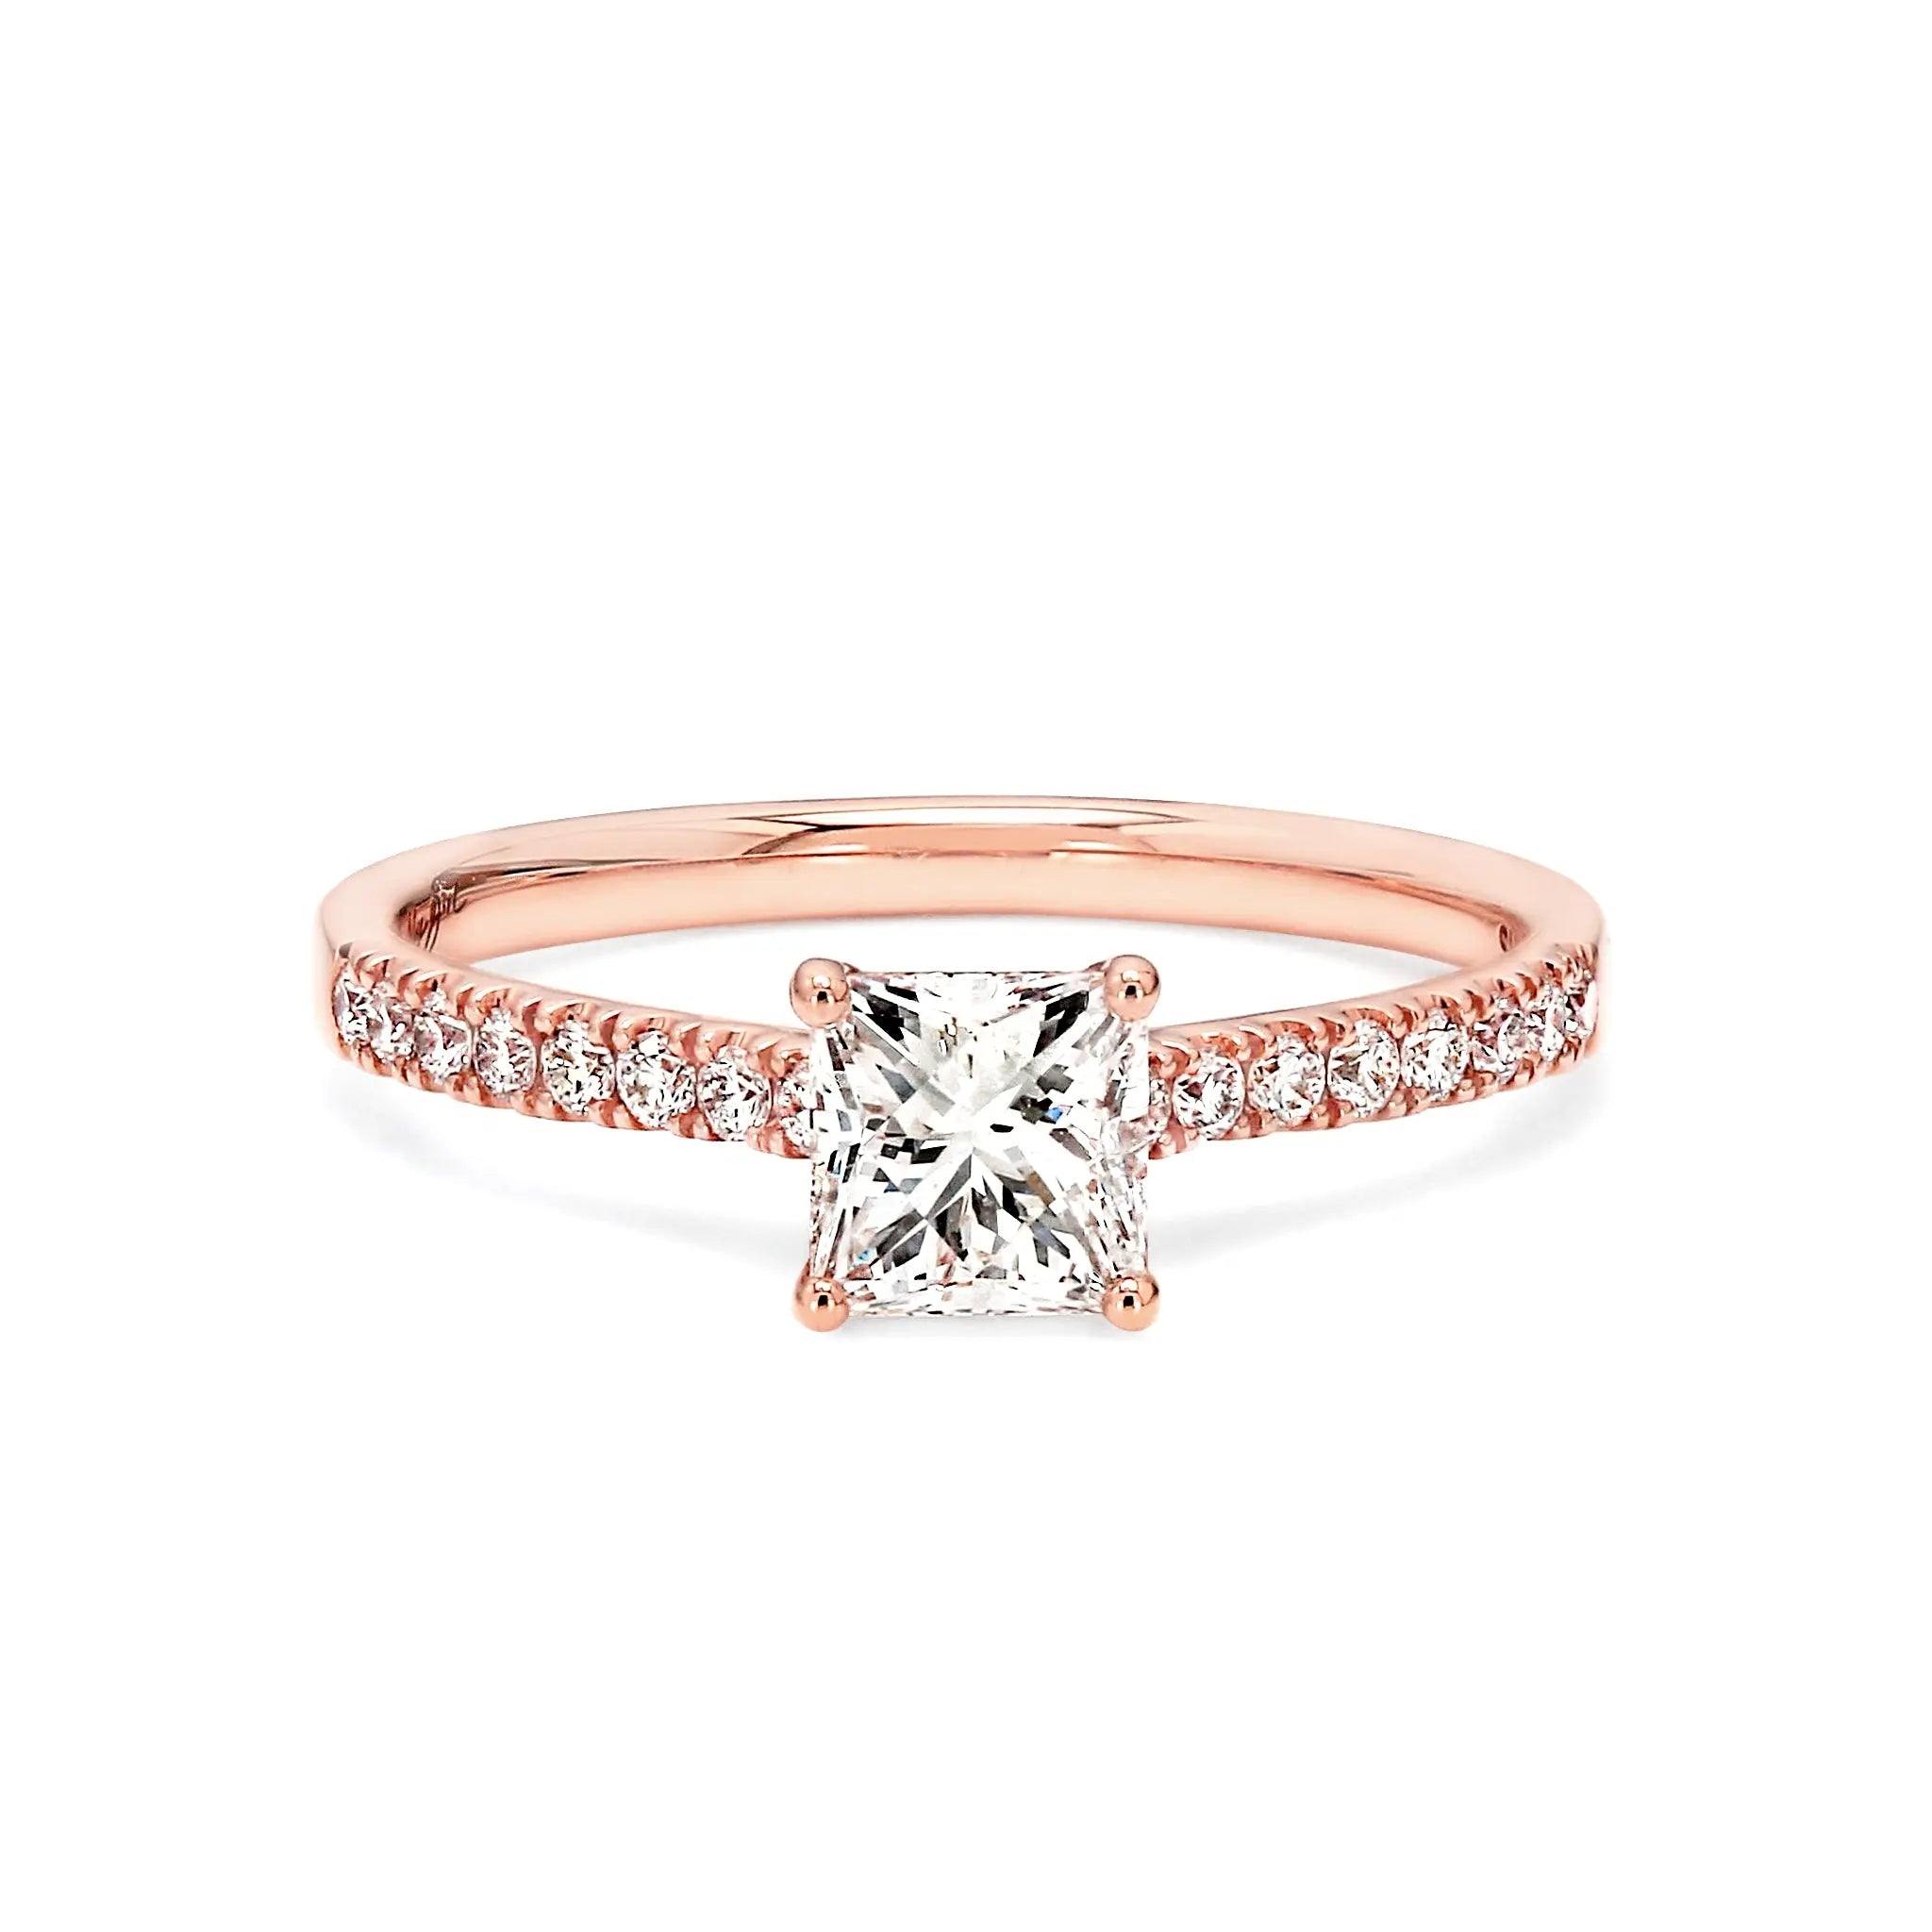 Shimansky - My Girl Diamond Microset Engagement Ring 1.00ct Crafted in 18K Rose Gold